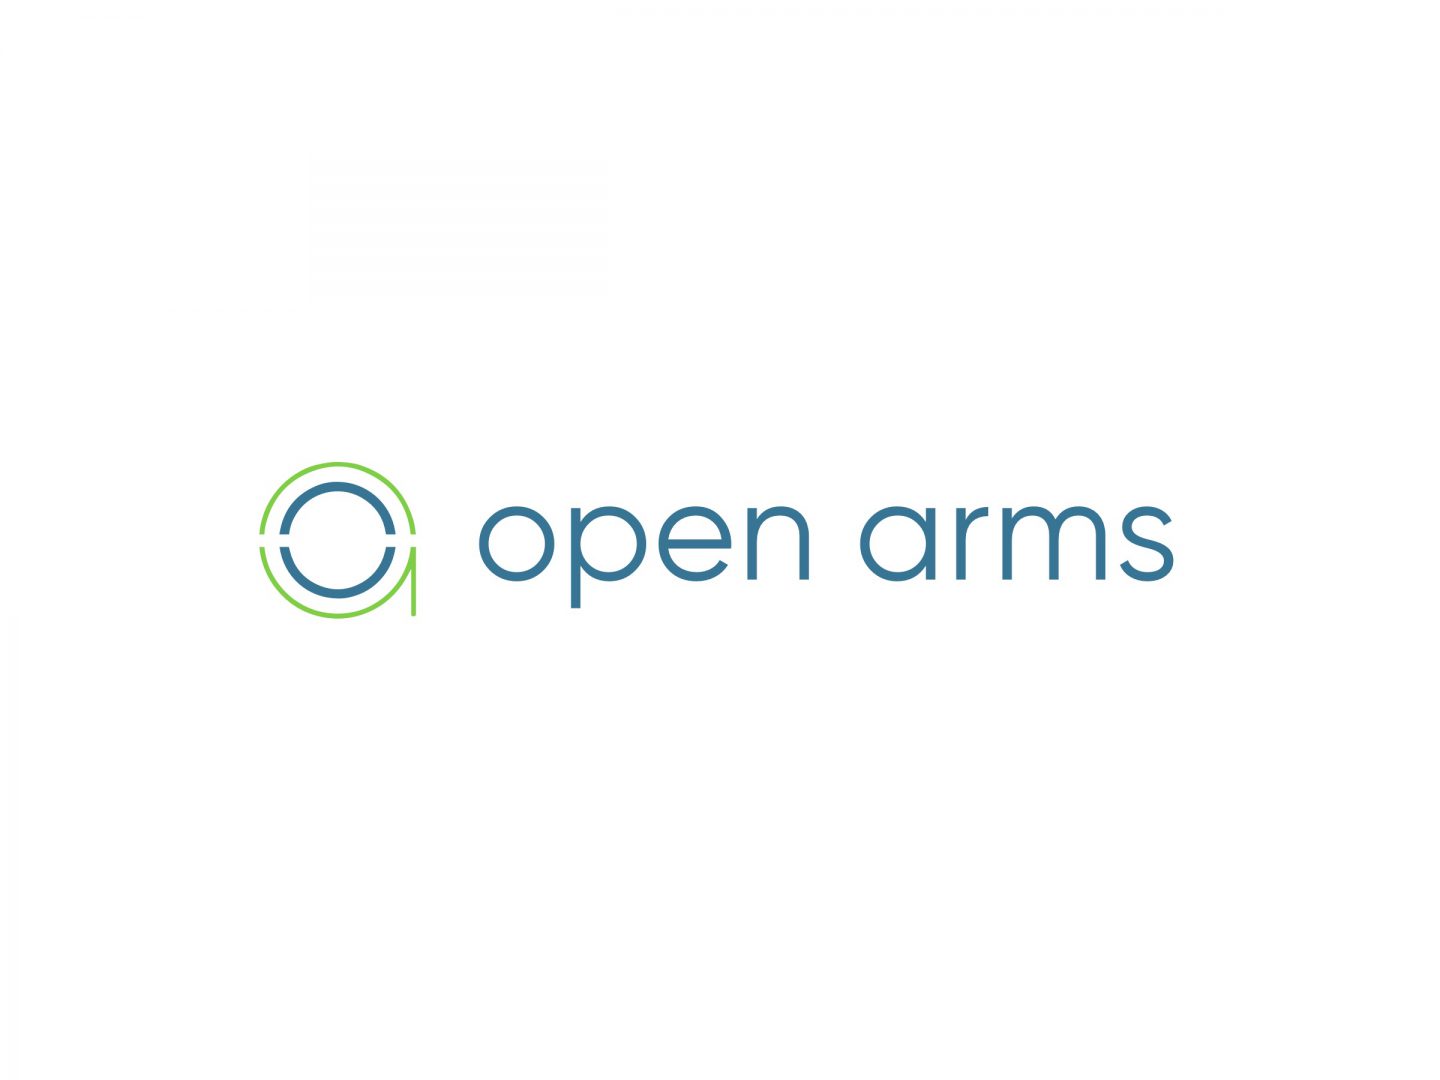 Open Arms Rebrand & Site Redesign